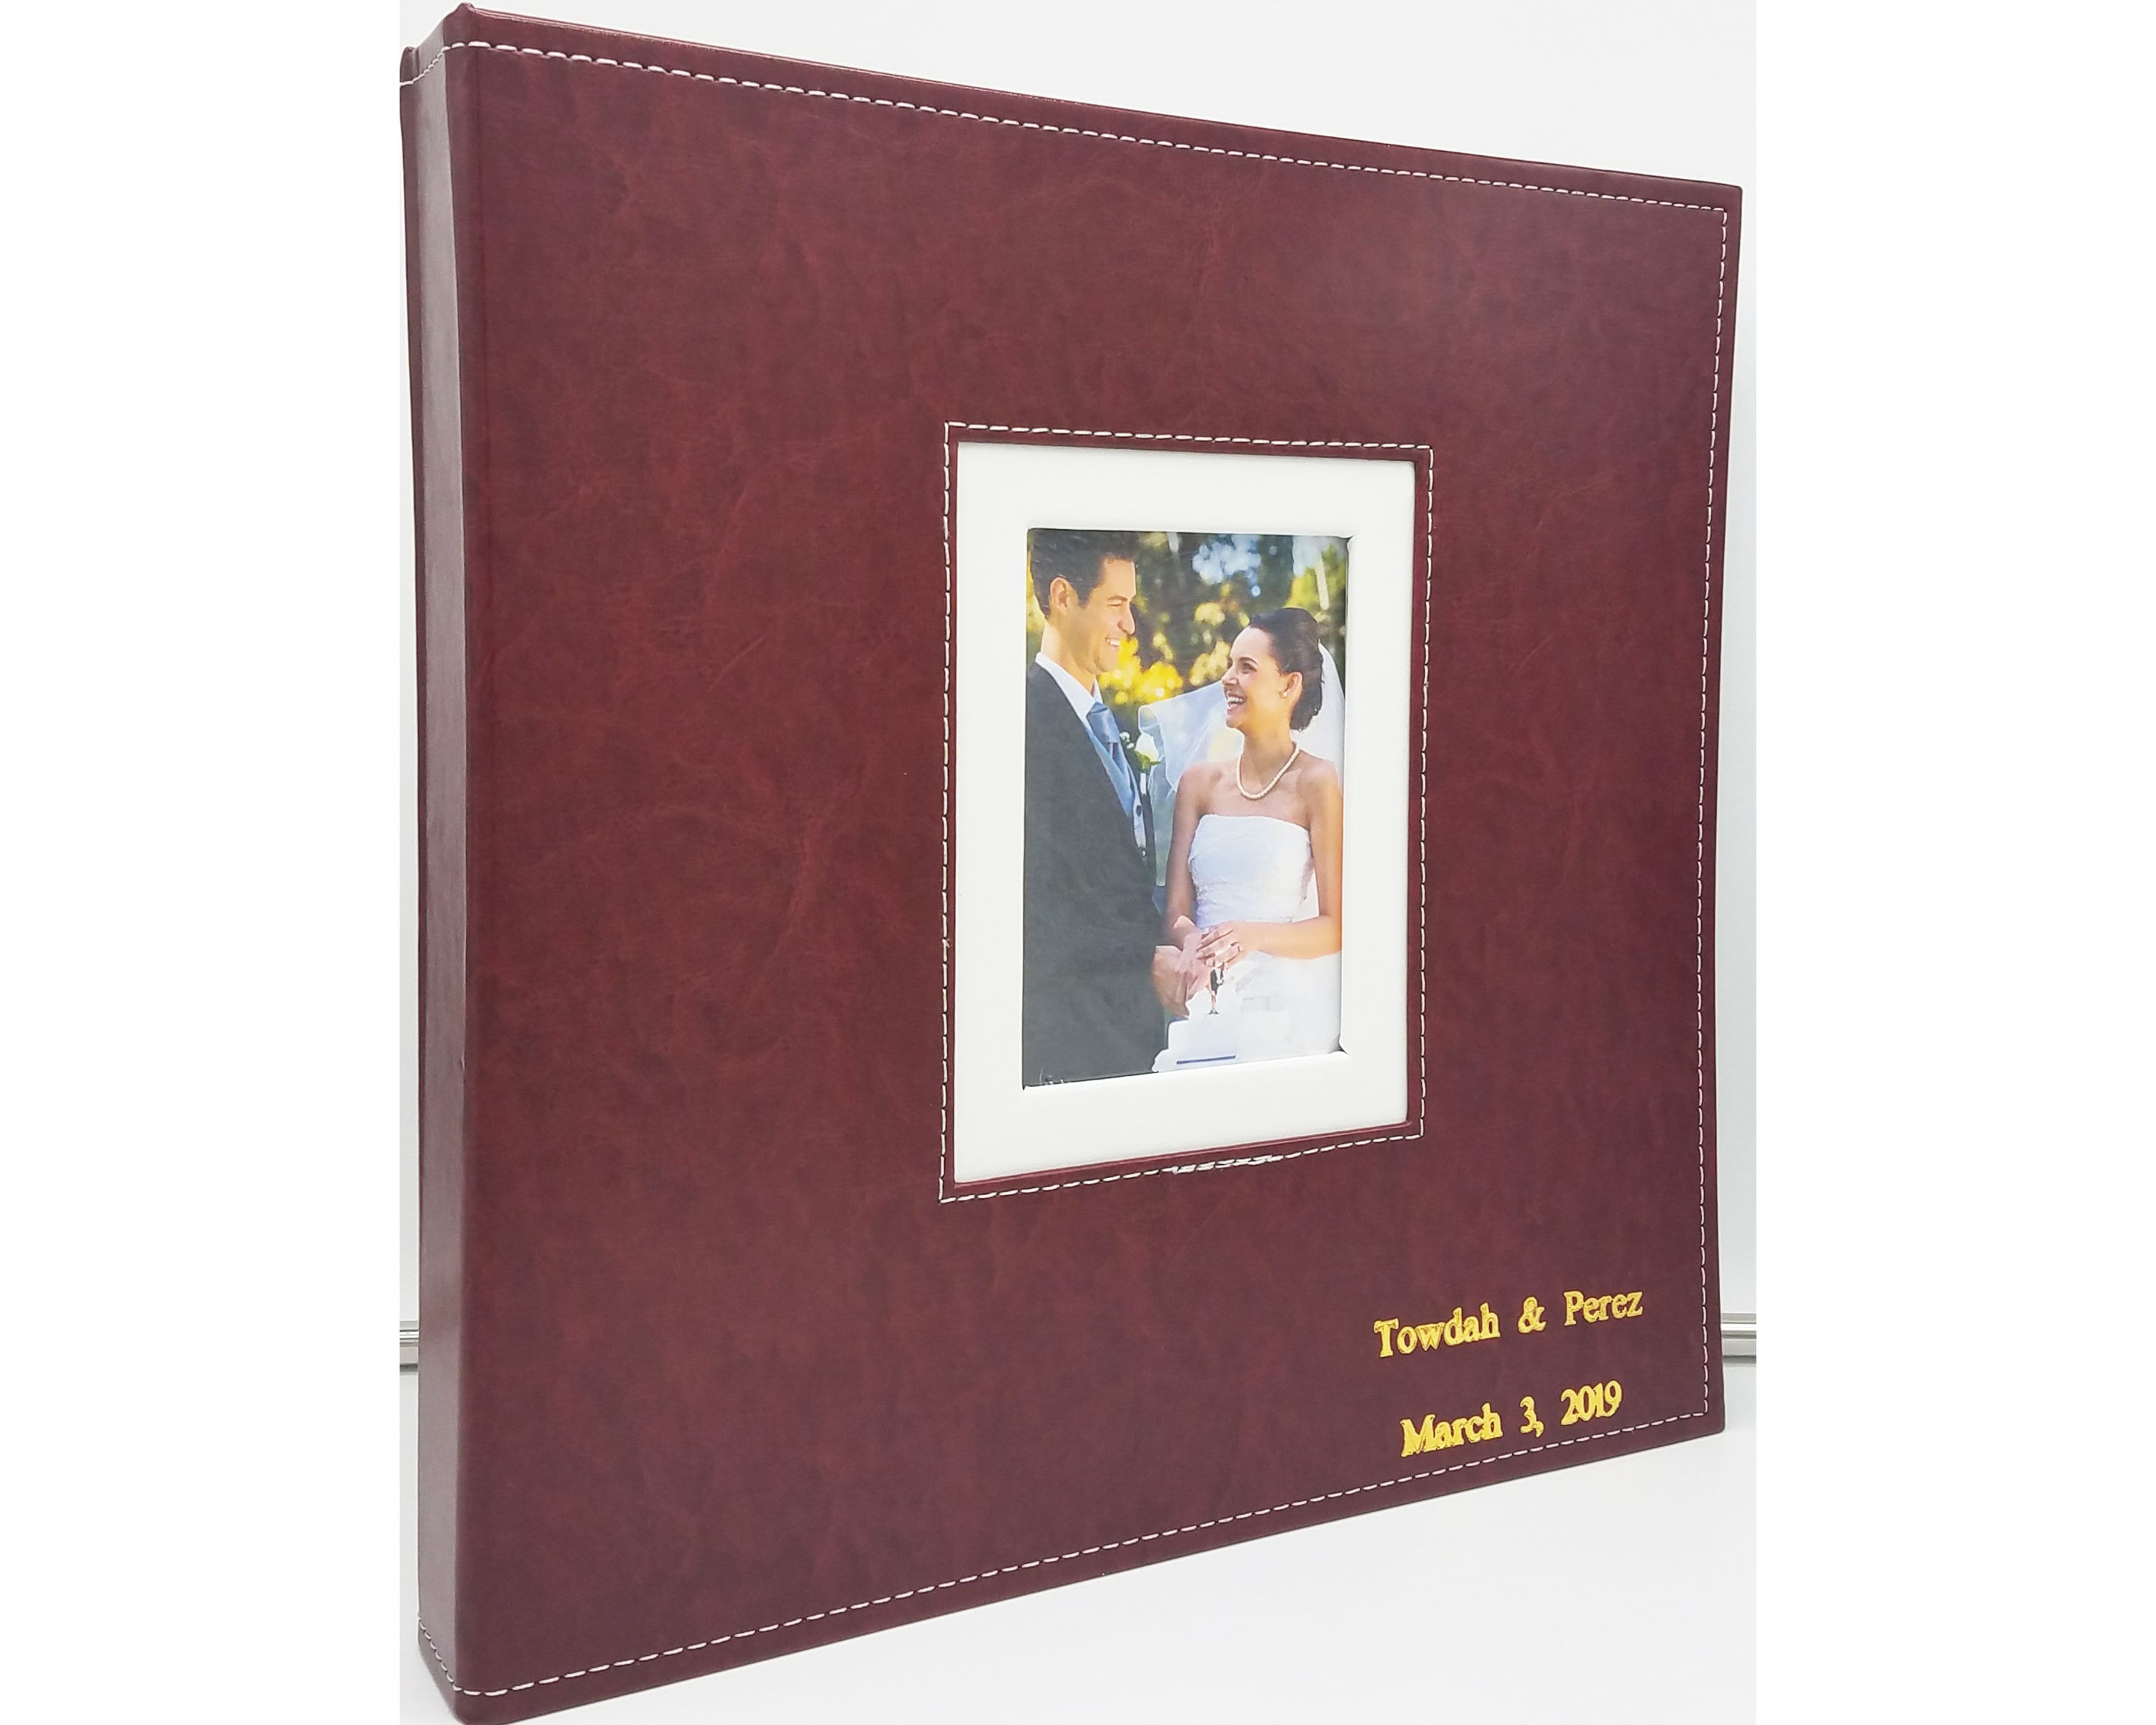 4 X 6 Inch Photo Sheet Protector Pages, Fits Standard 3-ring Binder Pack of  50 